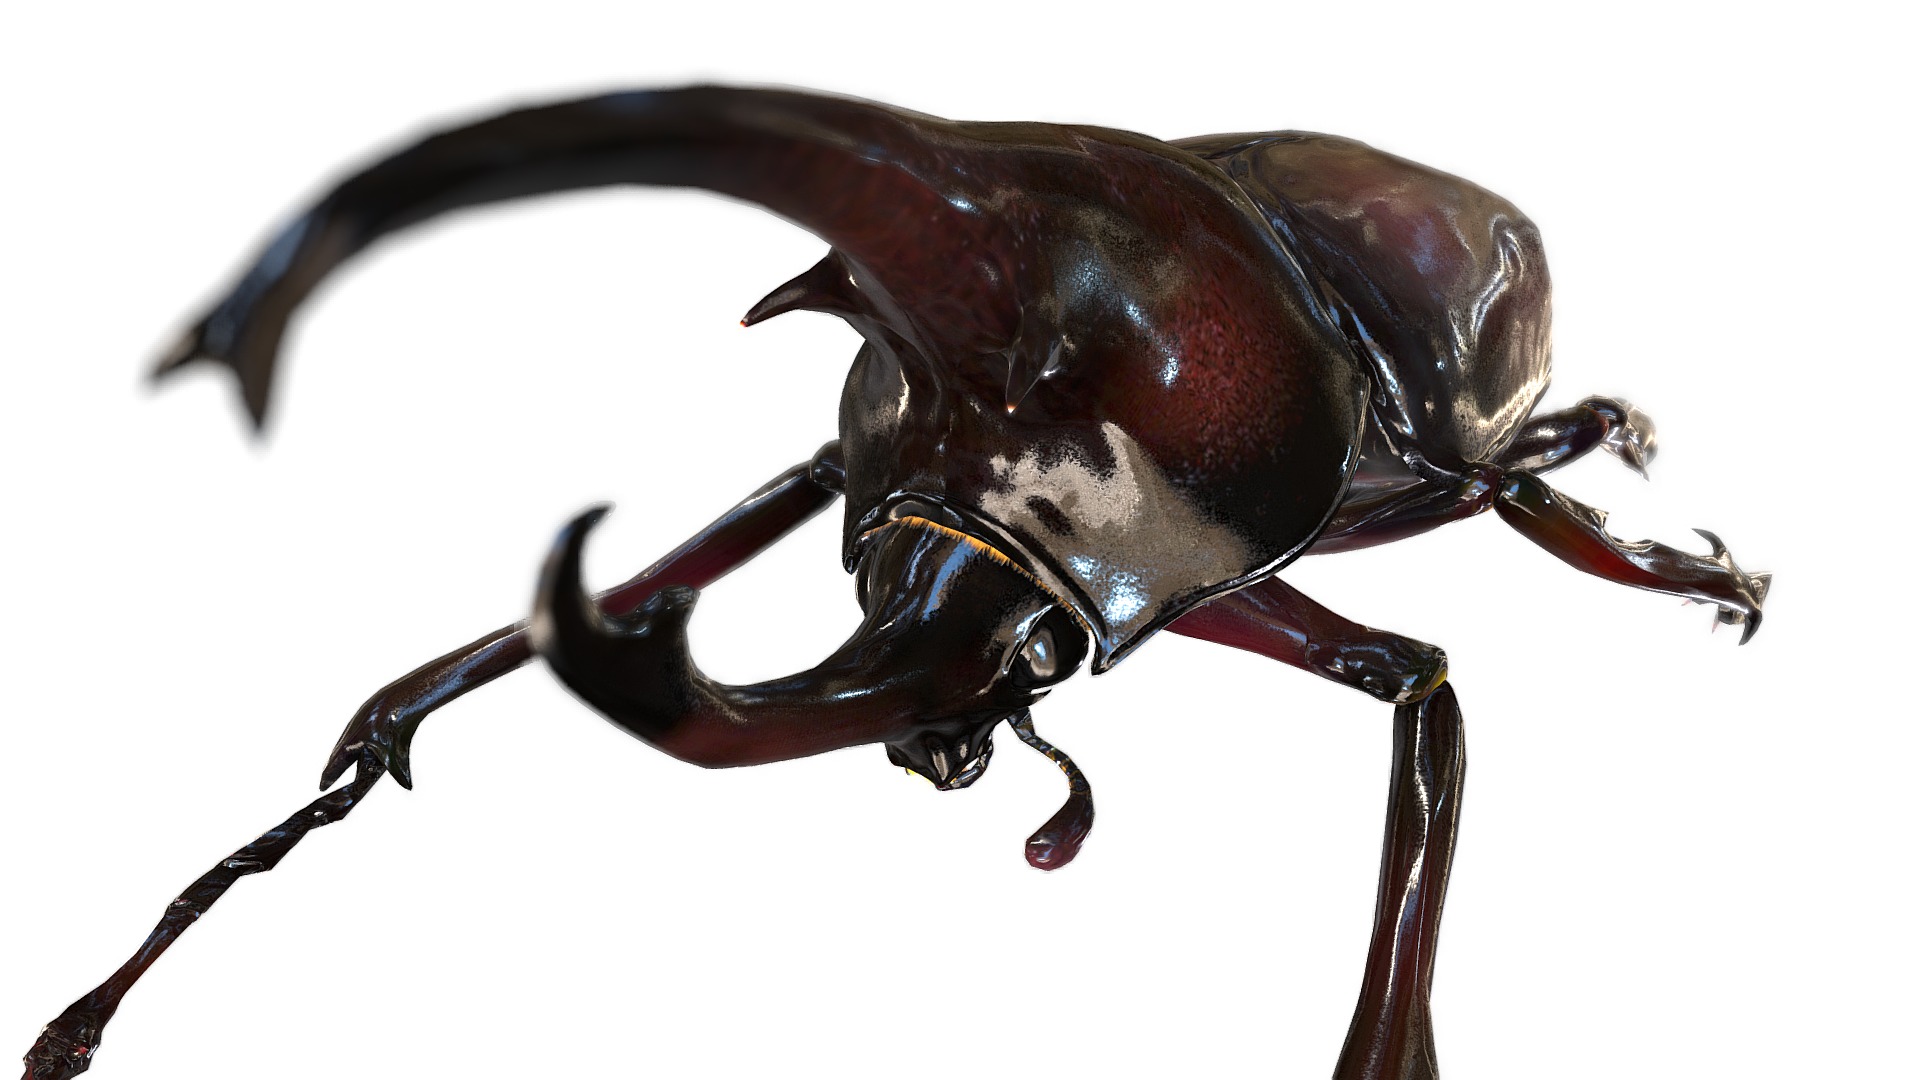 3D model Augosoma centaurus - This is a 3D model of the Augosoma centaurus. The 3D model is about a close-up of a beetle.